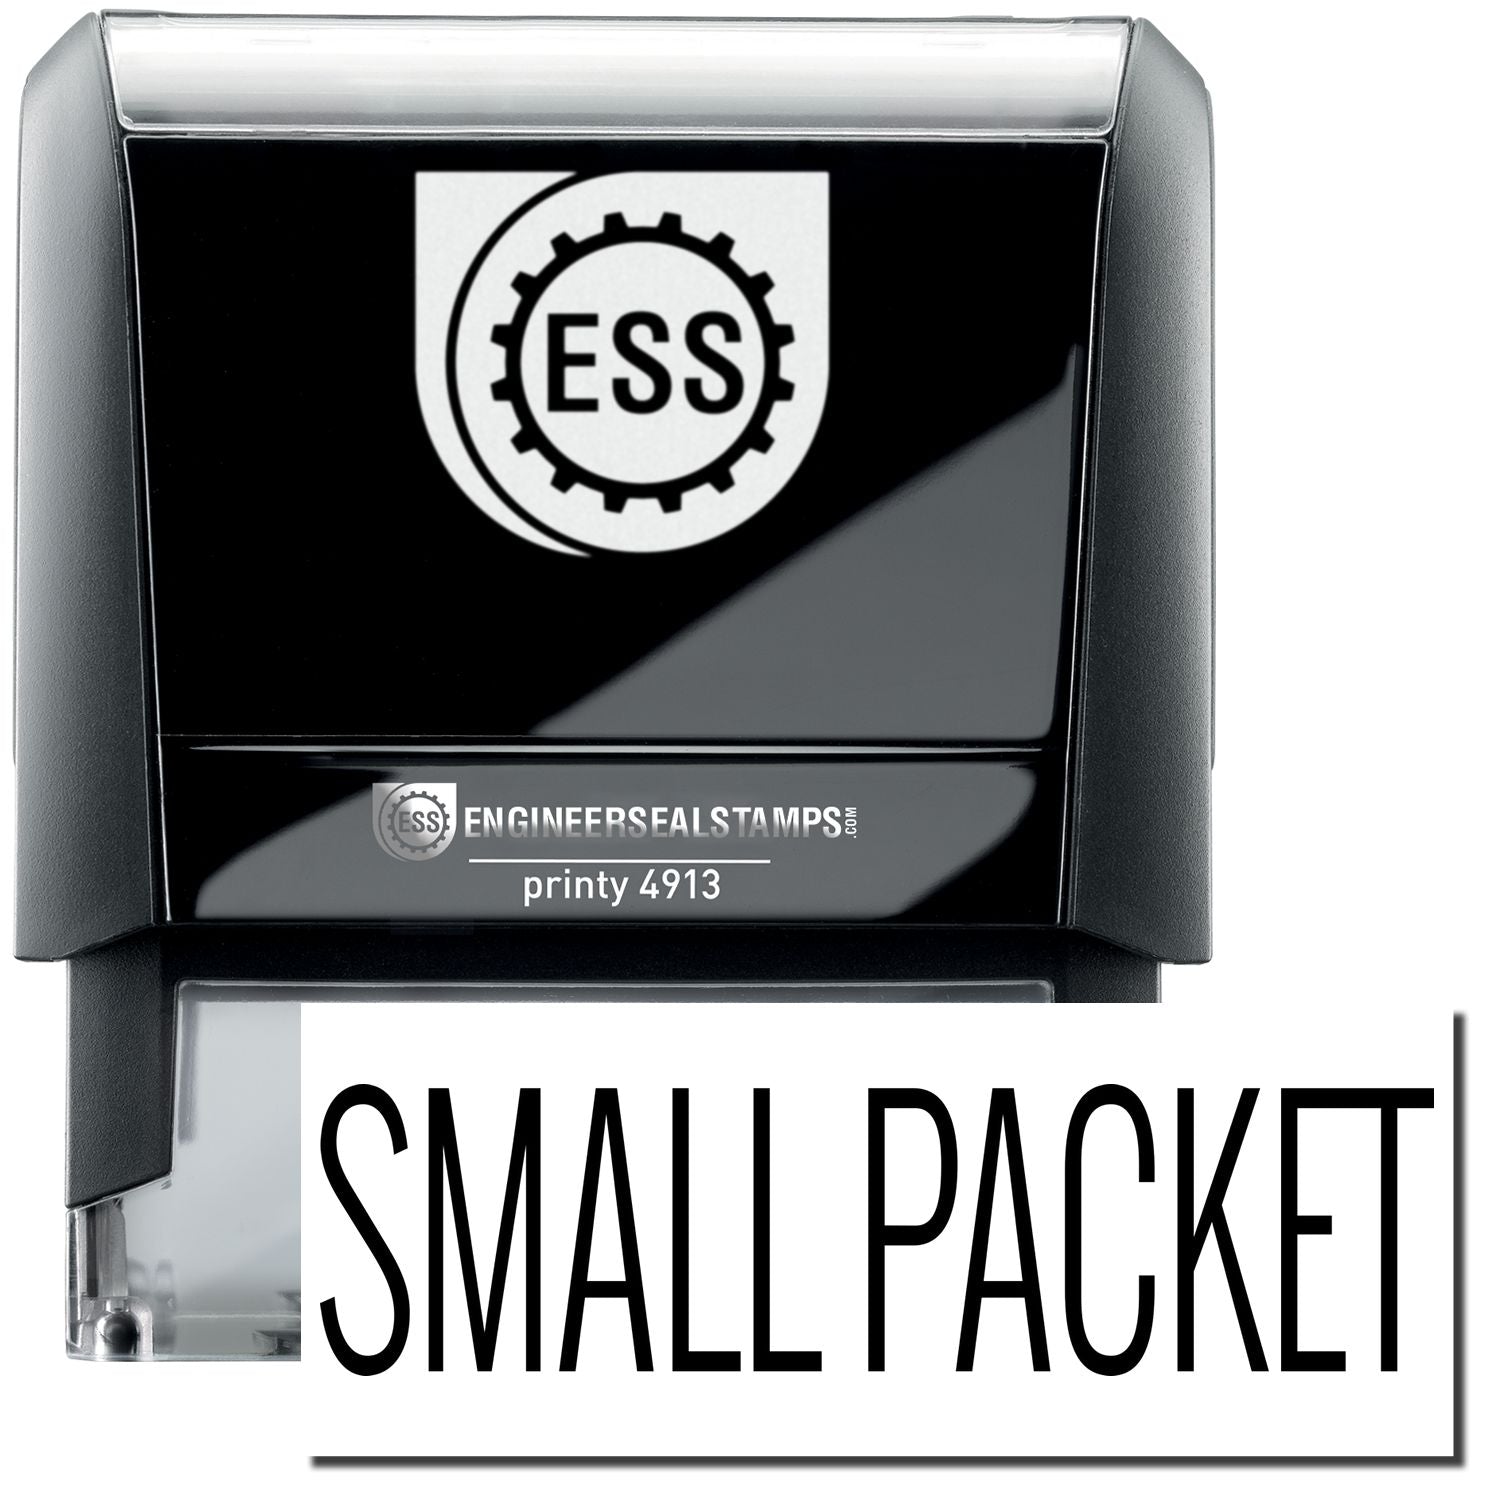 A self-inking stamp with a stamped image showing how the text "SMALL PACKET" in a large narrow font is displayed by it after stamping.